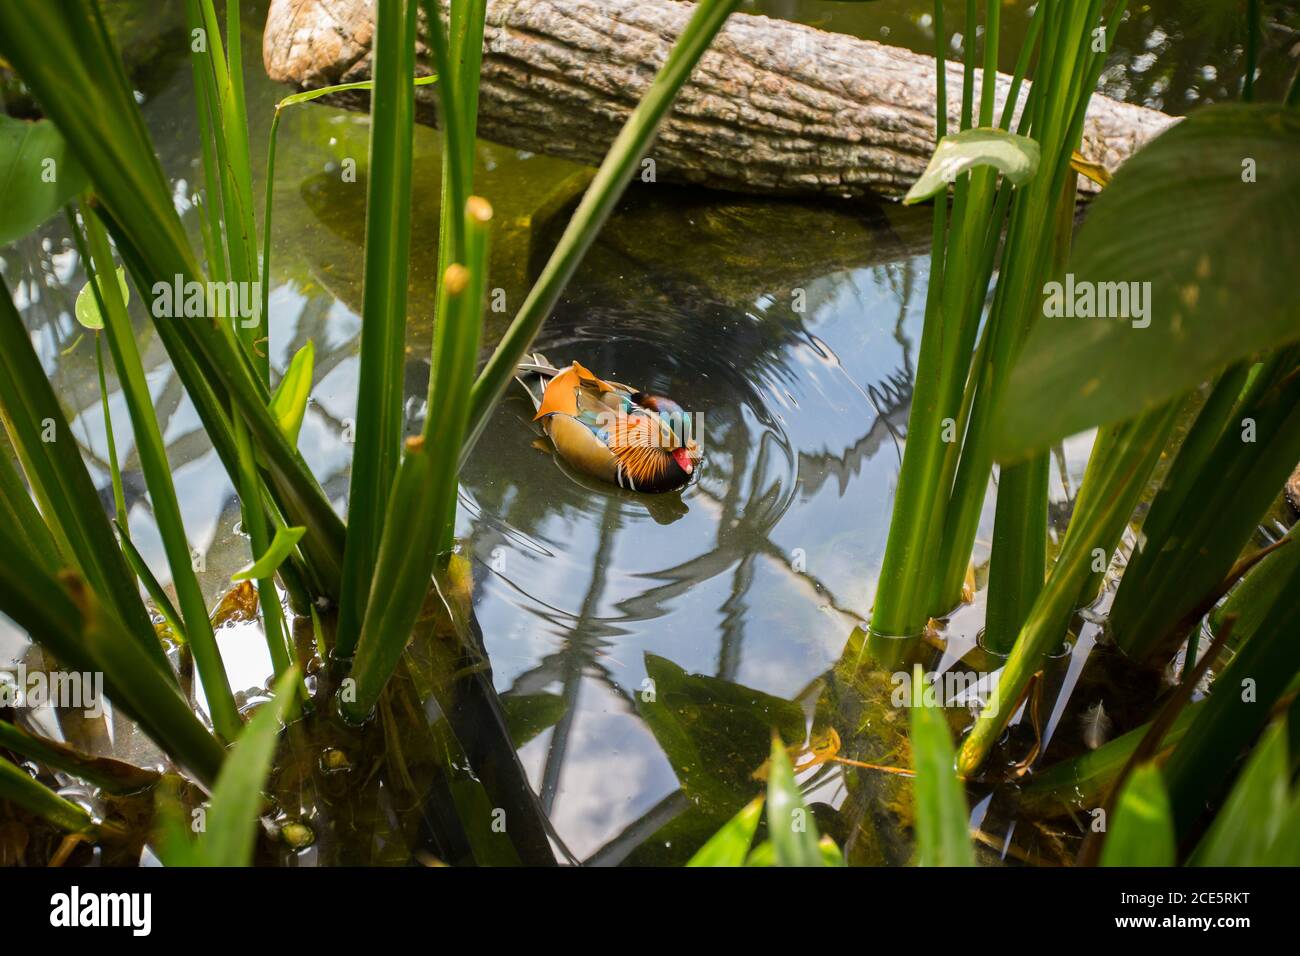 Mandarin duck is chilling in the pond at Jewel Changi Airport, Singapore. Stock Photo